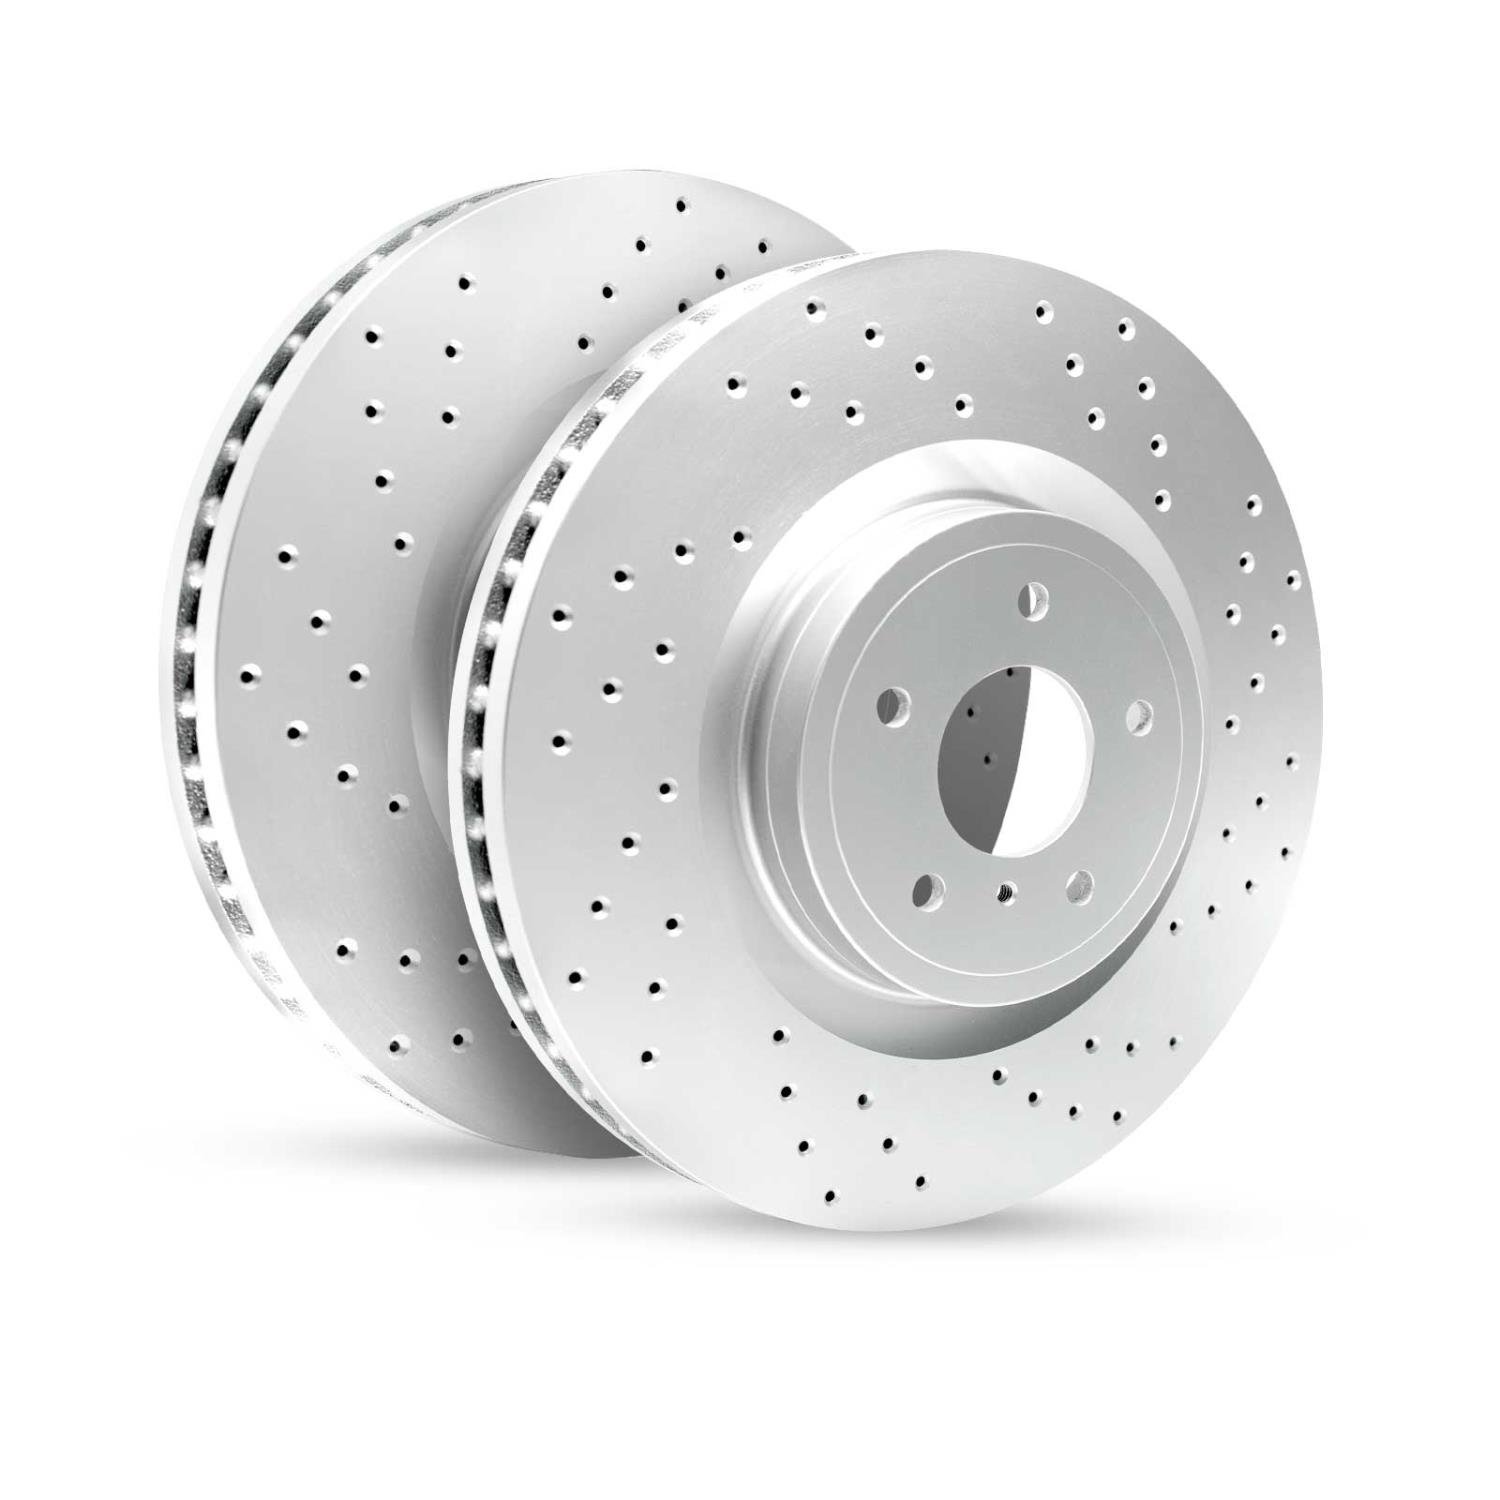 GEO-Carbon Drilled/Slotted Rotors, 1971-1991 Fits Multiple Makes/Models, Position: Front